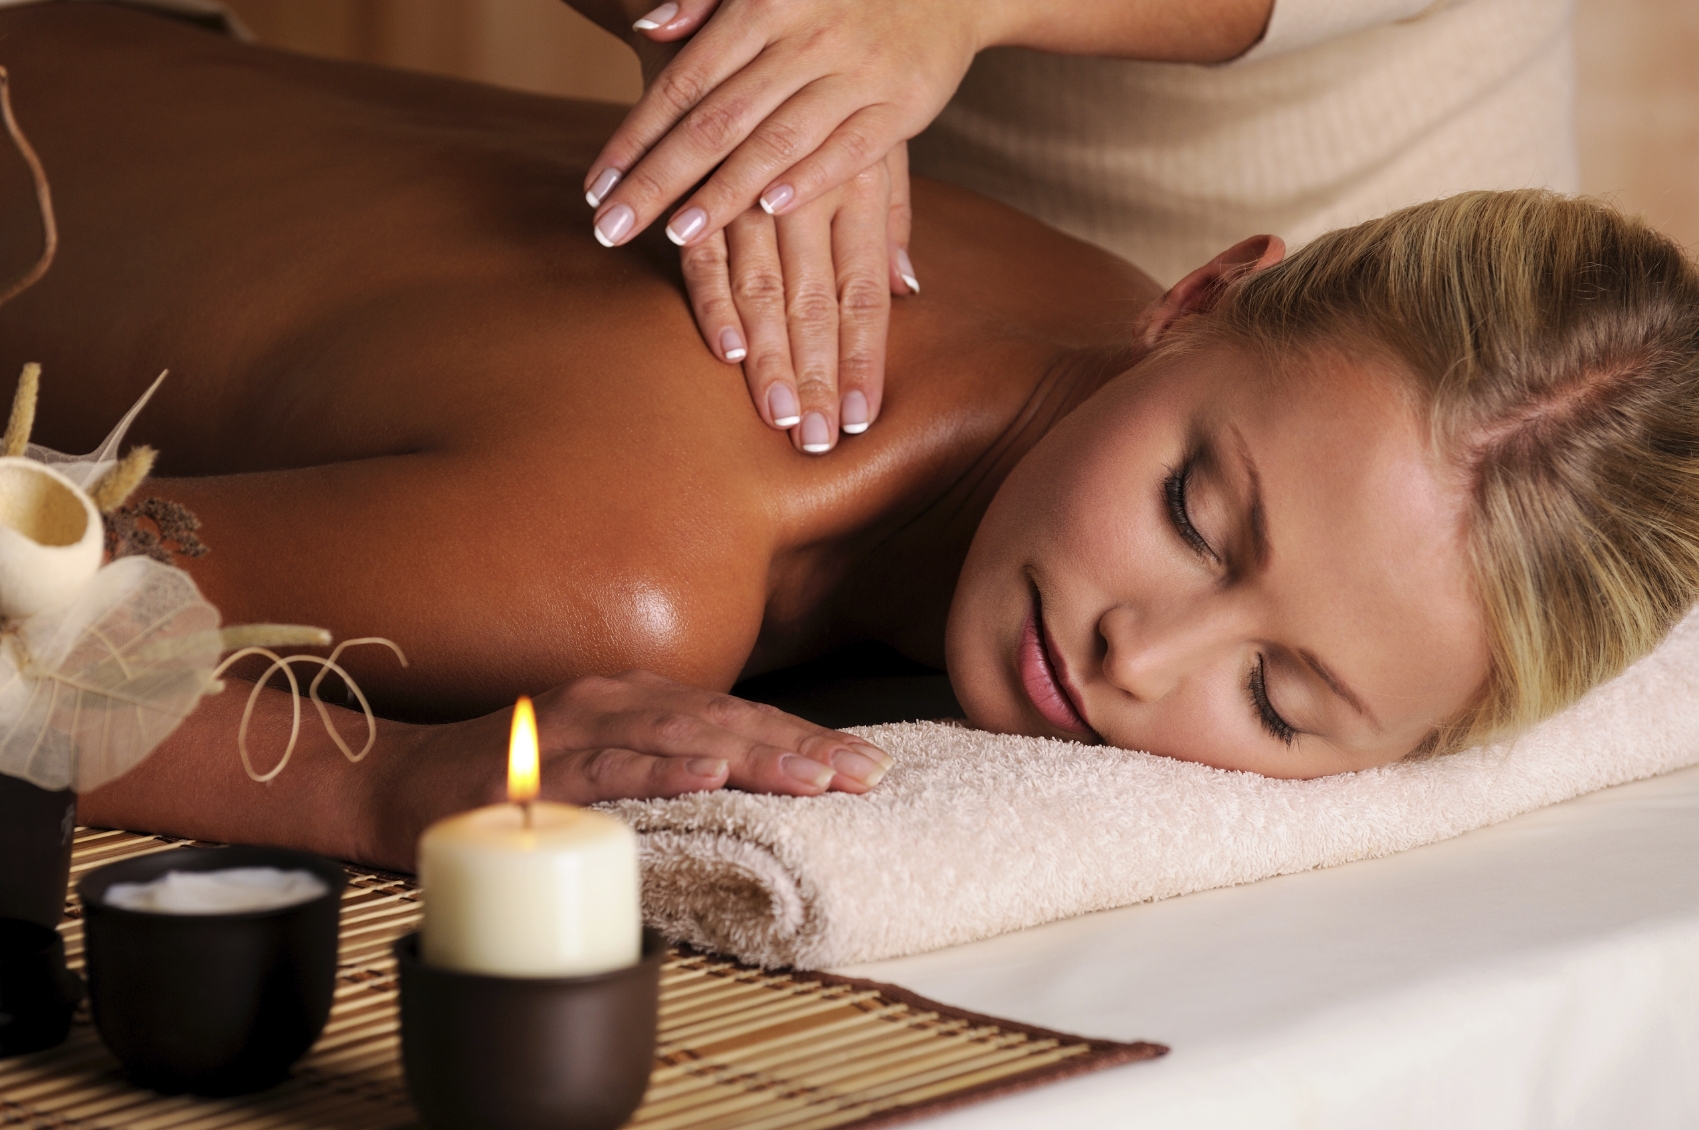 Featured image for “Massage Therapy Franchise”